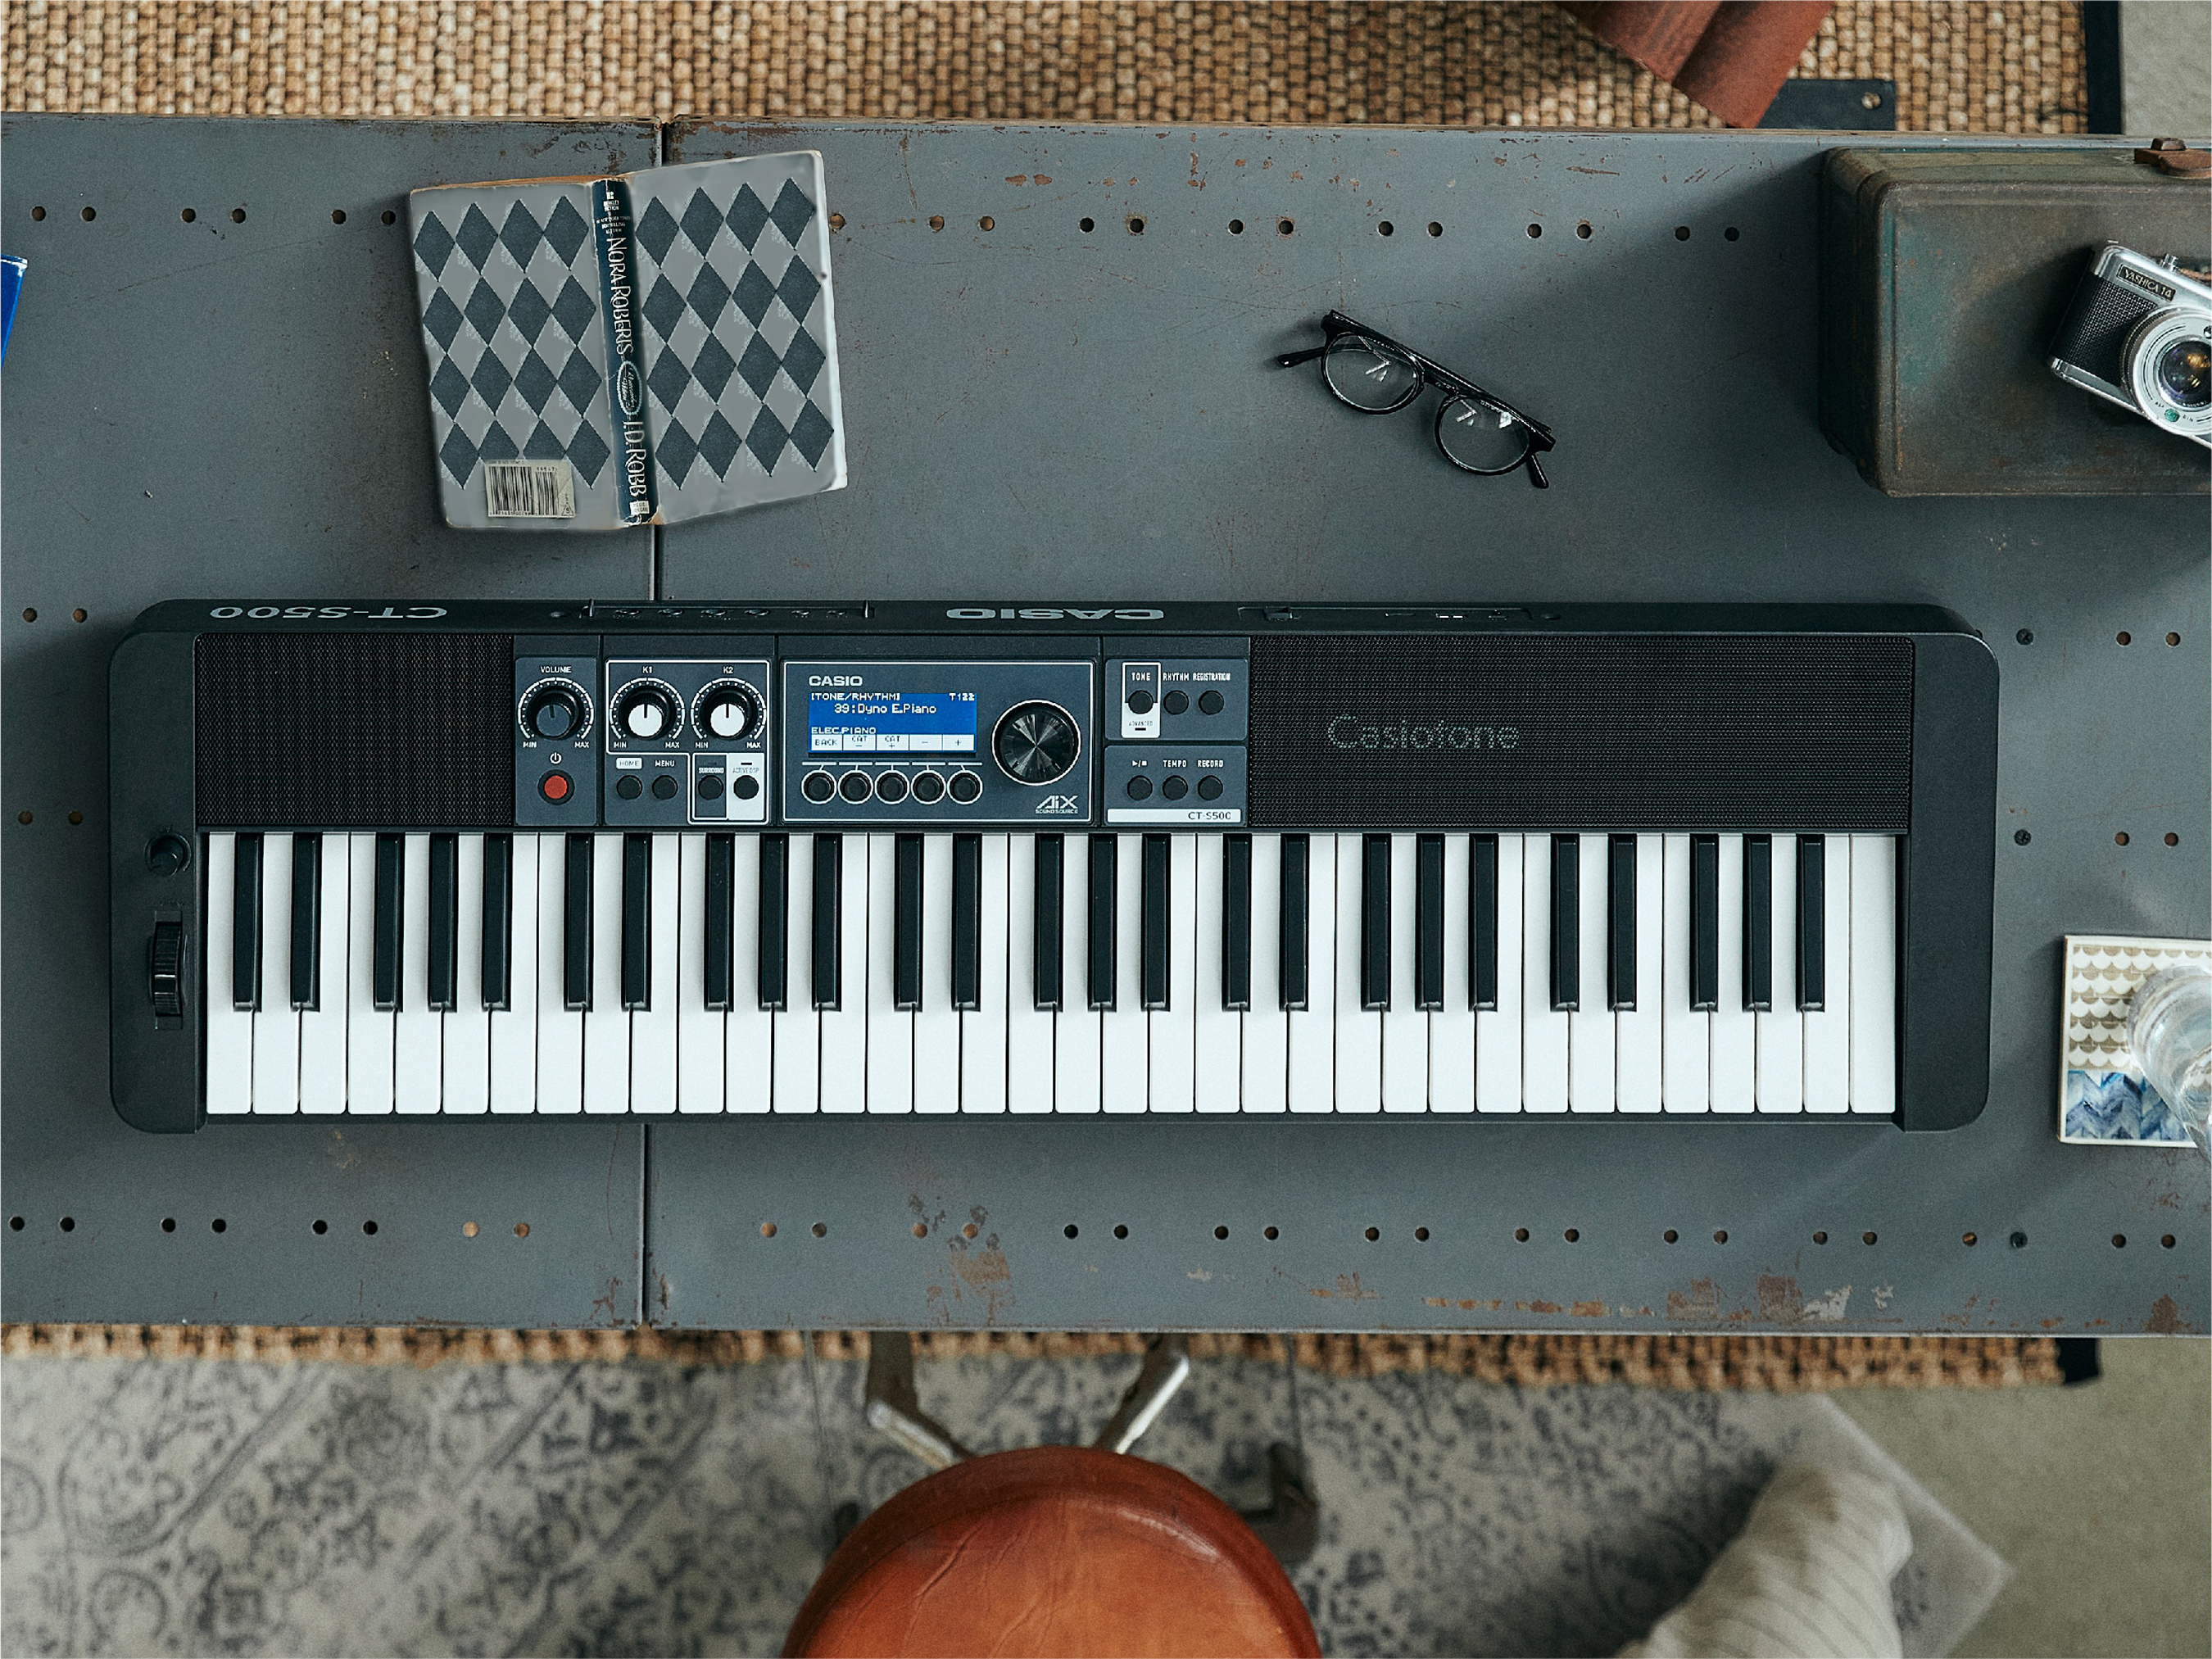 Casio’s new CT-S500 includes the CT-S1000V’s features without the vocal synthesis component. For musicians on any budget looking for a versatile, portable keyboard for performing or creating, the search is over.